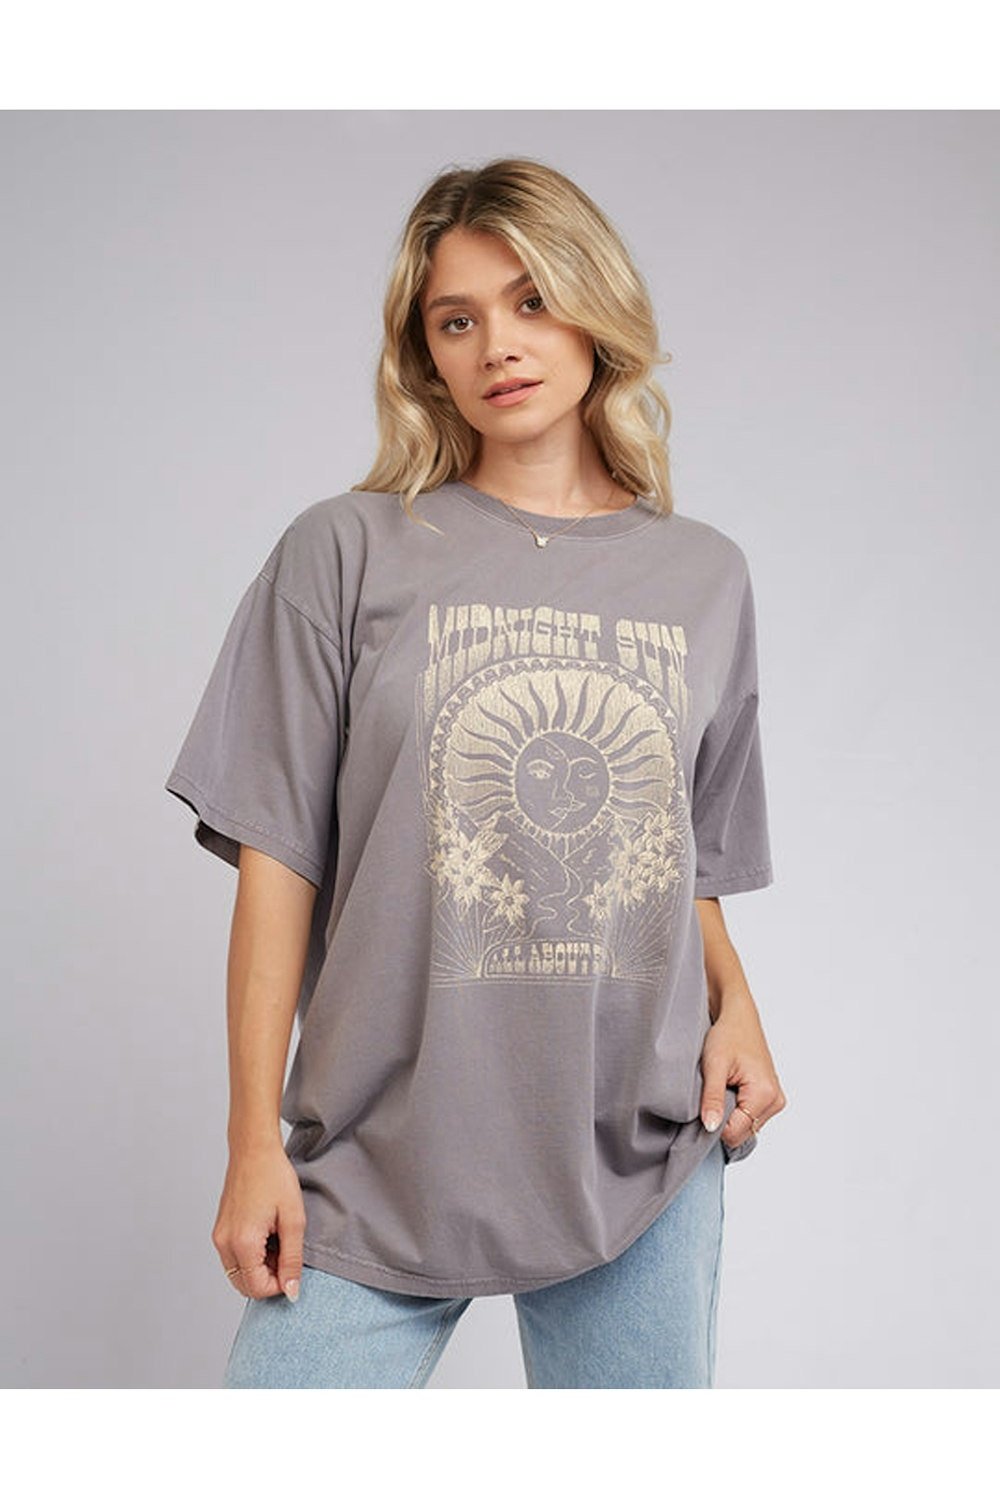 All about eve midnight sun tee - charcoal